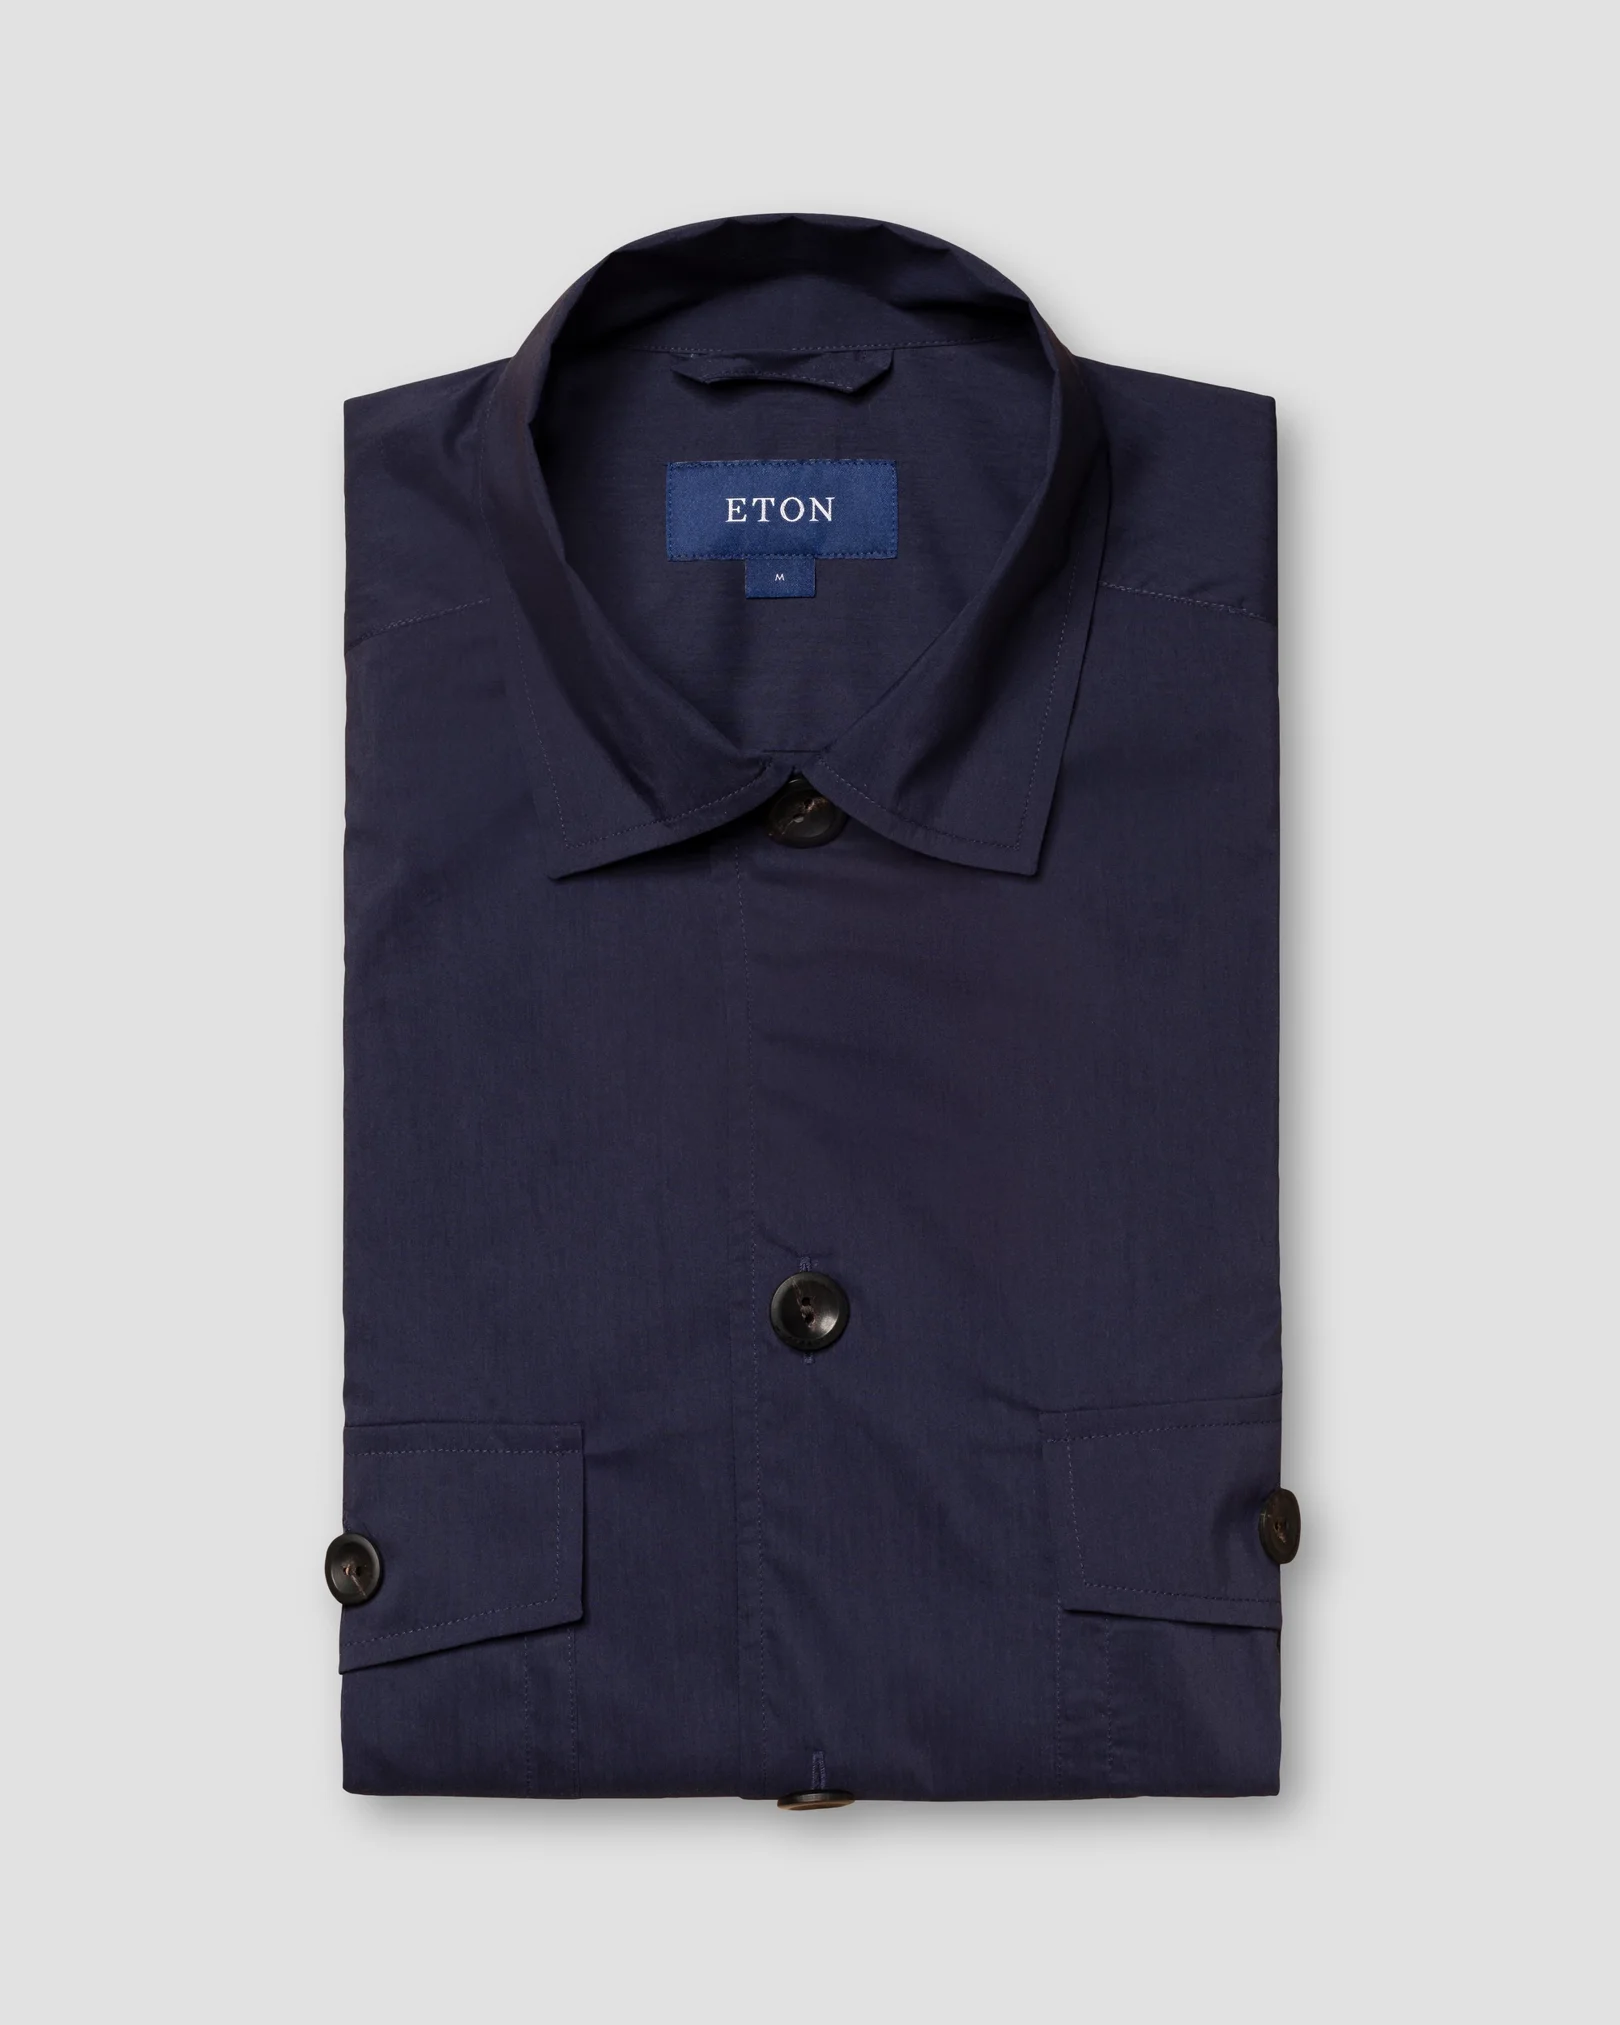 Eton - navy blue cotton and nylon collar with no collarstand double round with piping regular